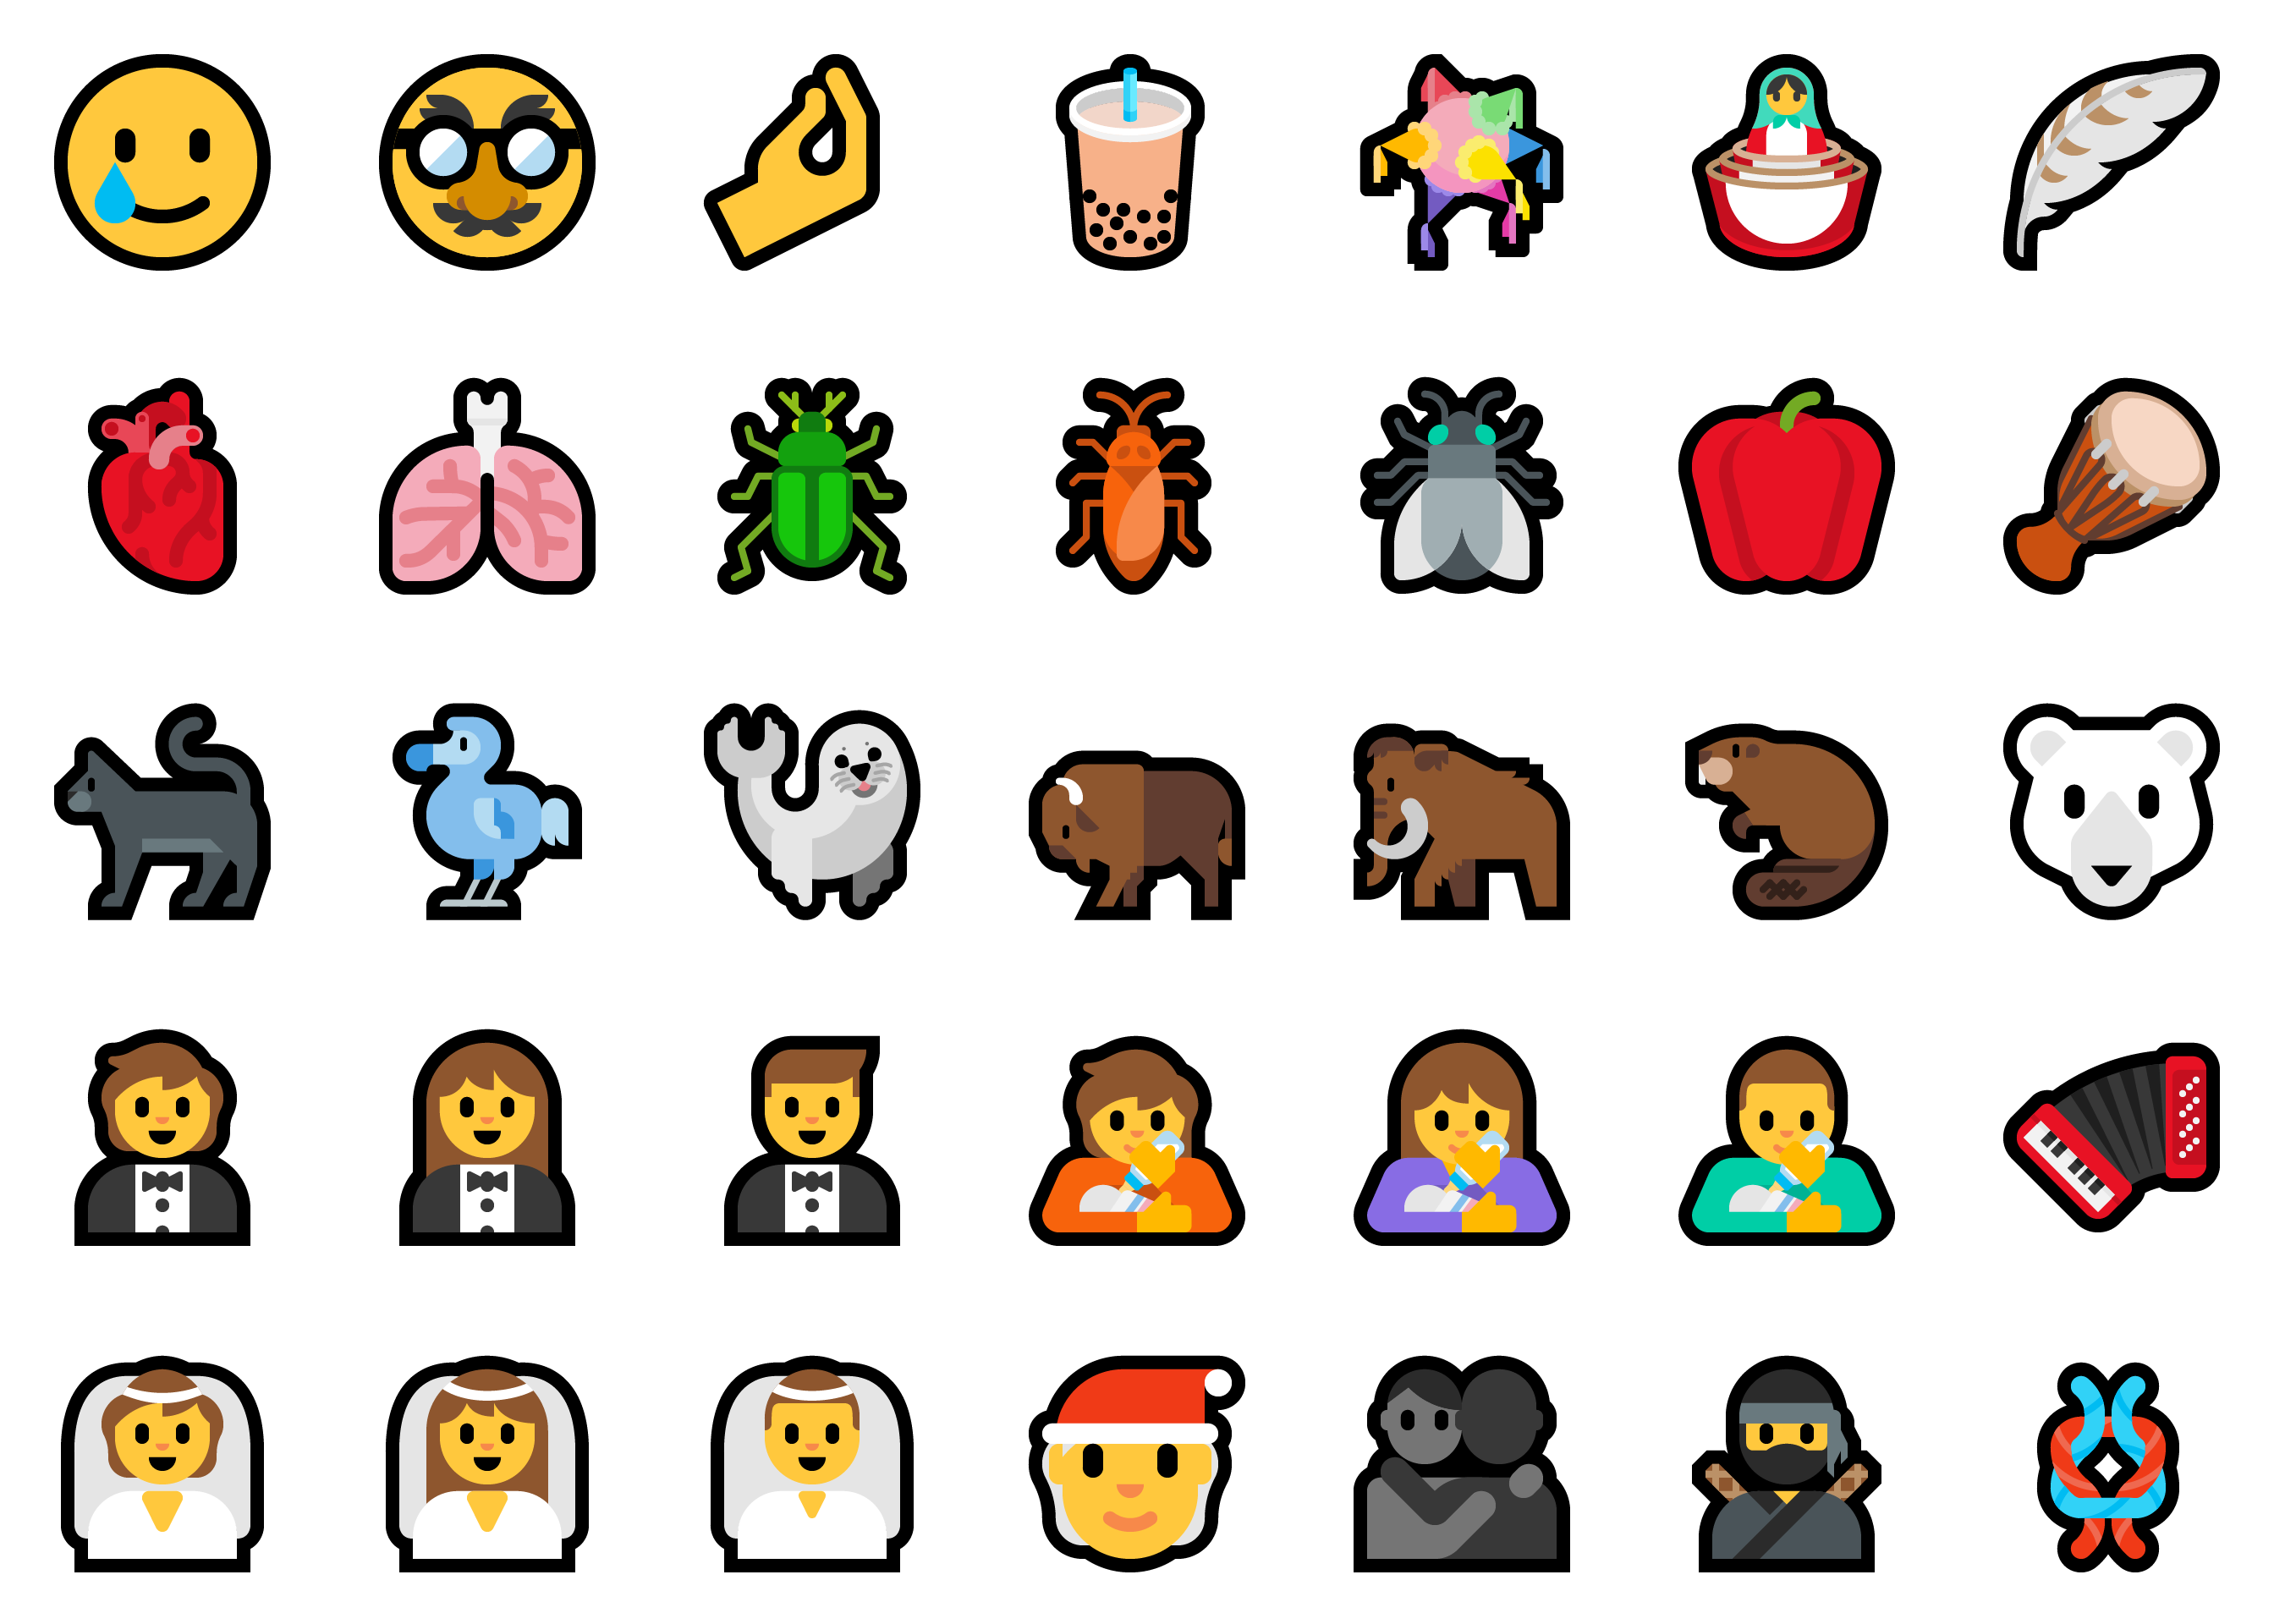 Showing an array of the new emoji that will be added, including ninja, bubble tea, face wearing a disguise, and smiling face with a tear.